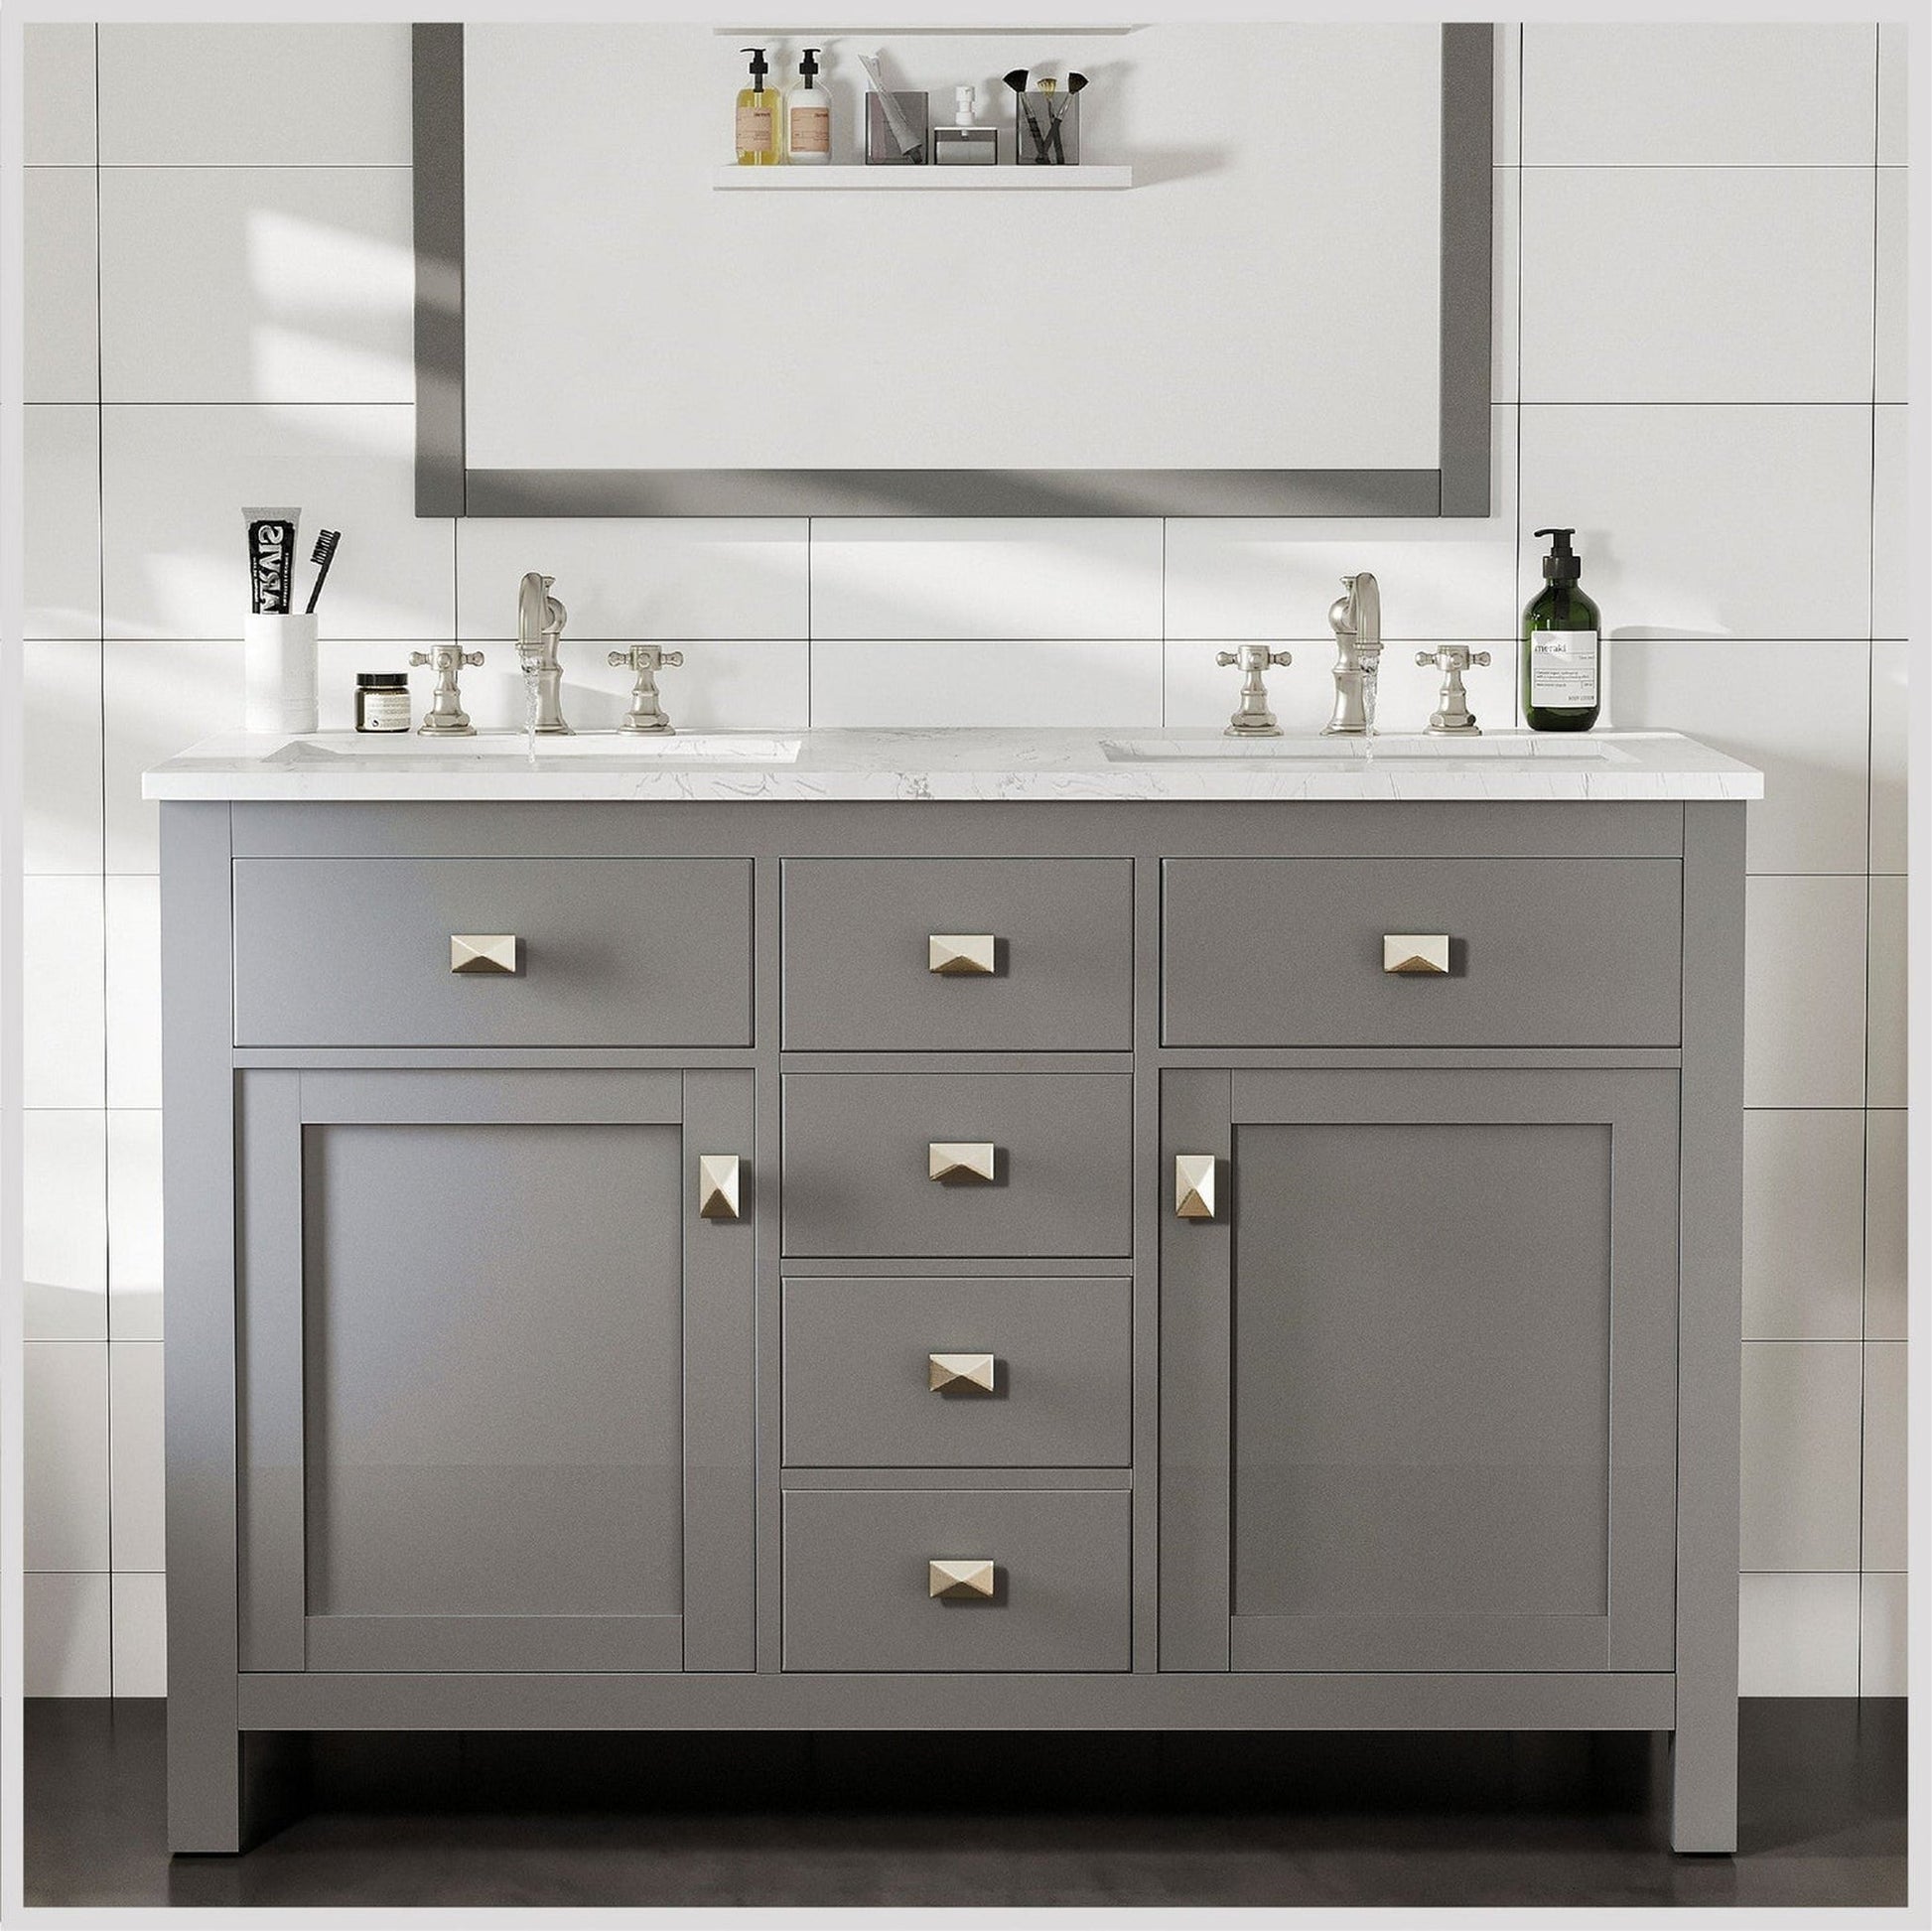 Eviva Totti Artemis 44" x 34" Gray Freestanding Bathroom Vanity With Carrara Style Man-made Stone Countertop and Double Undermount Sink